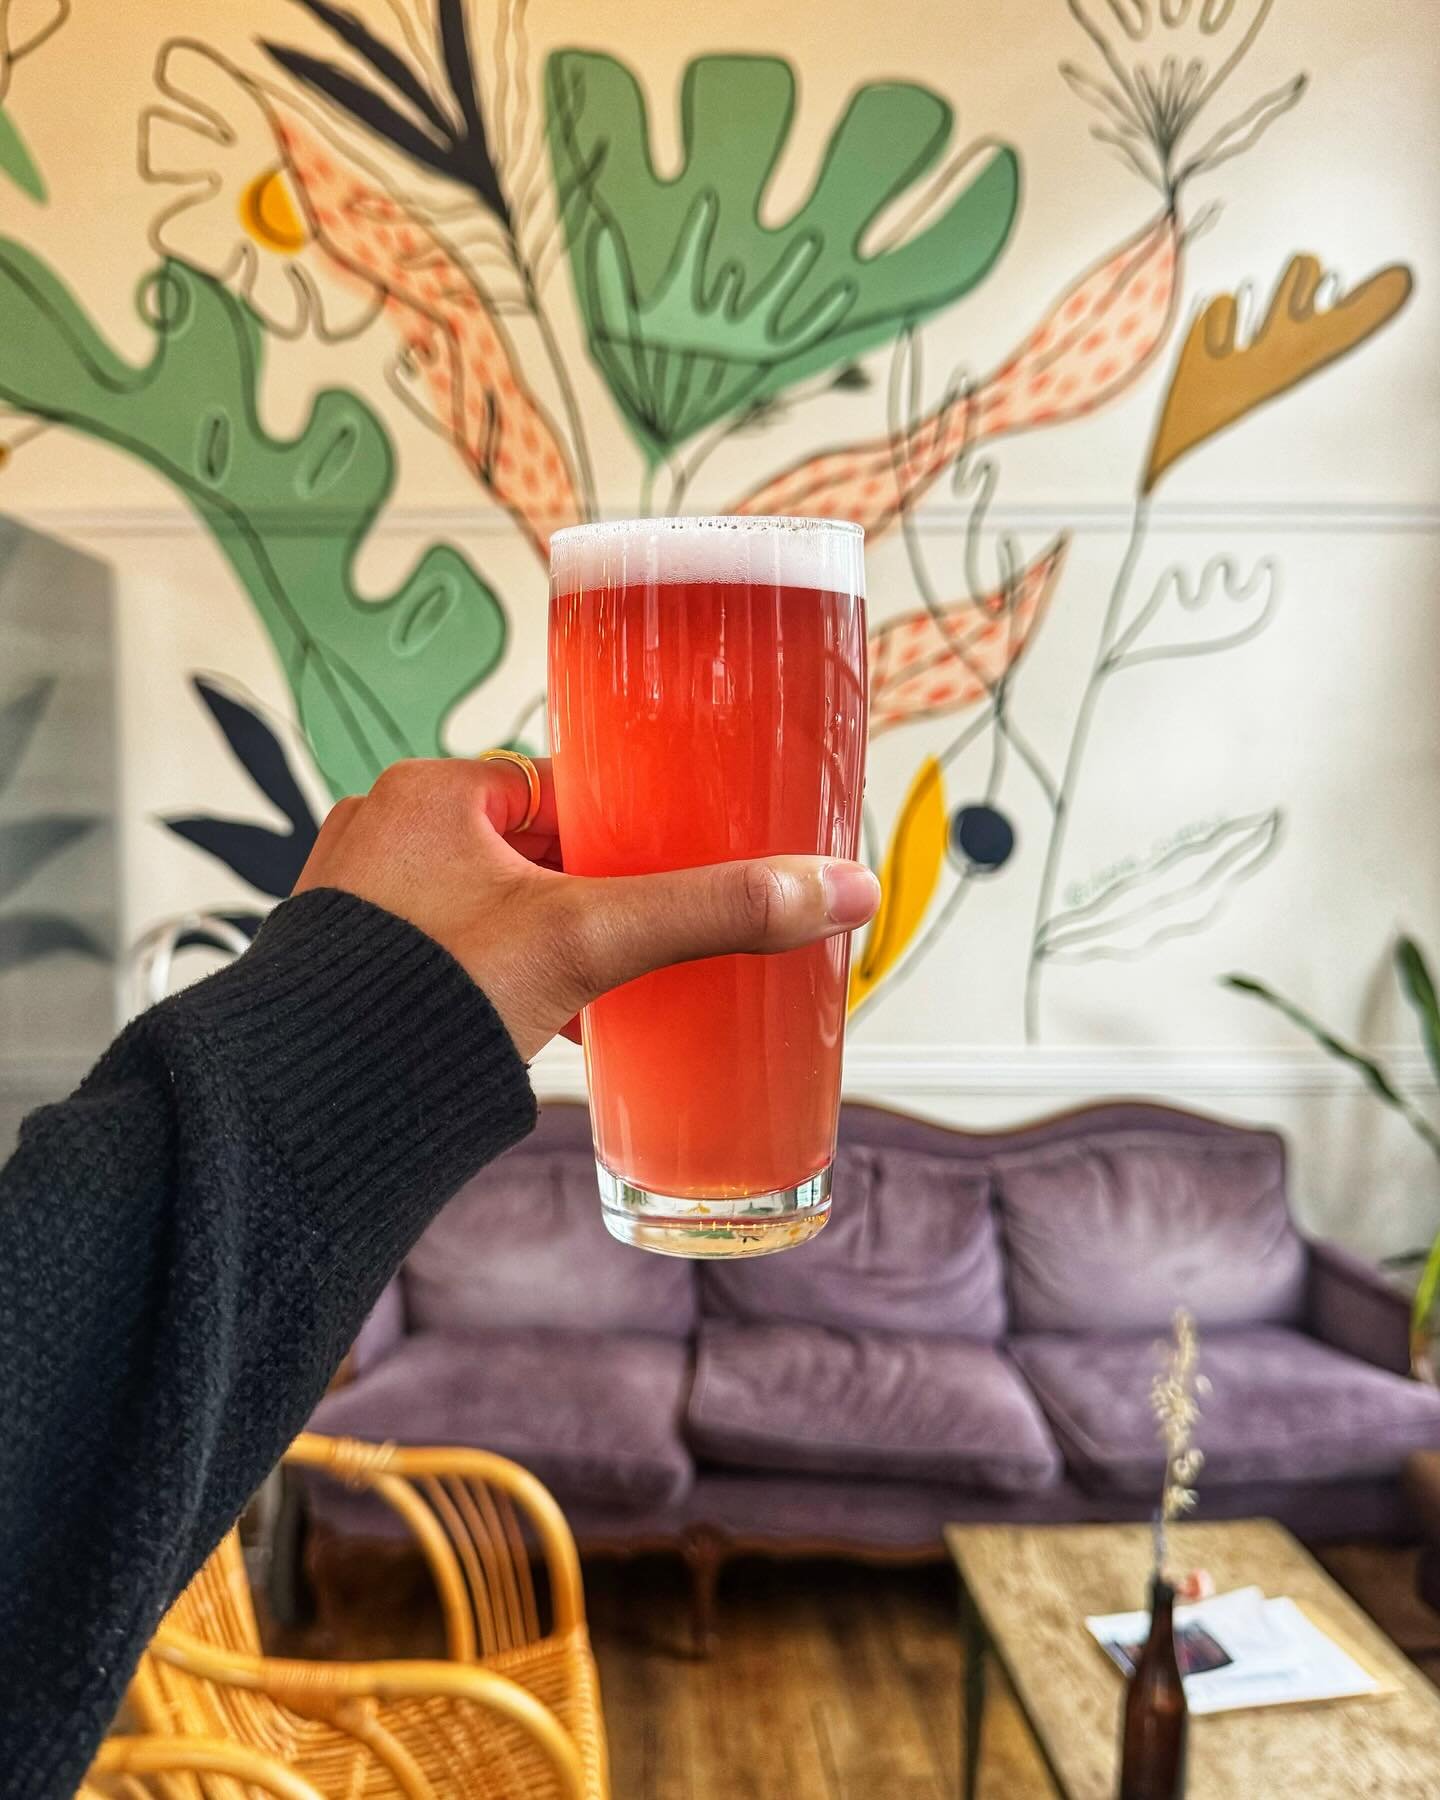 The more Cherry Beer the better! 🍒 Our Cherry American Wheat Beer is pairs perfectly with this incredible Spring weather we&rsquo;ve been having. We have a veryyyy limited quantity of the Cherry Beer leftover from this past weekends festivities so s